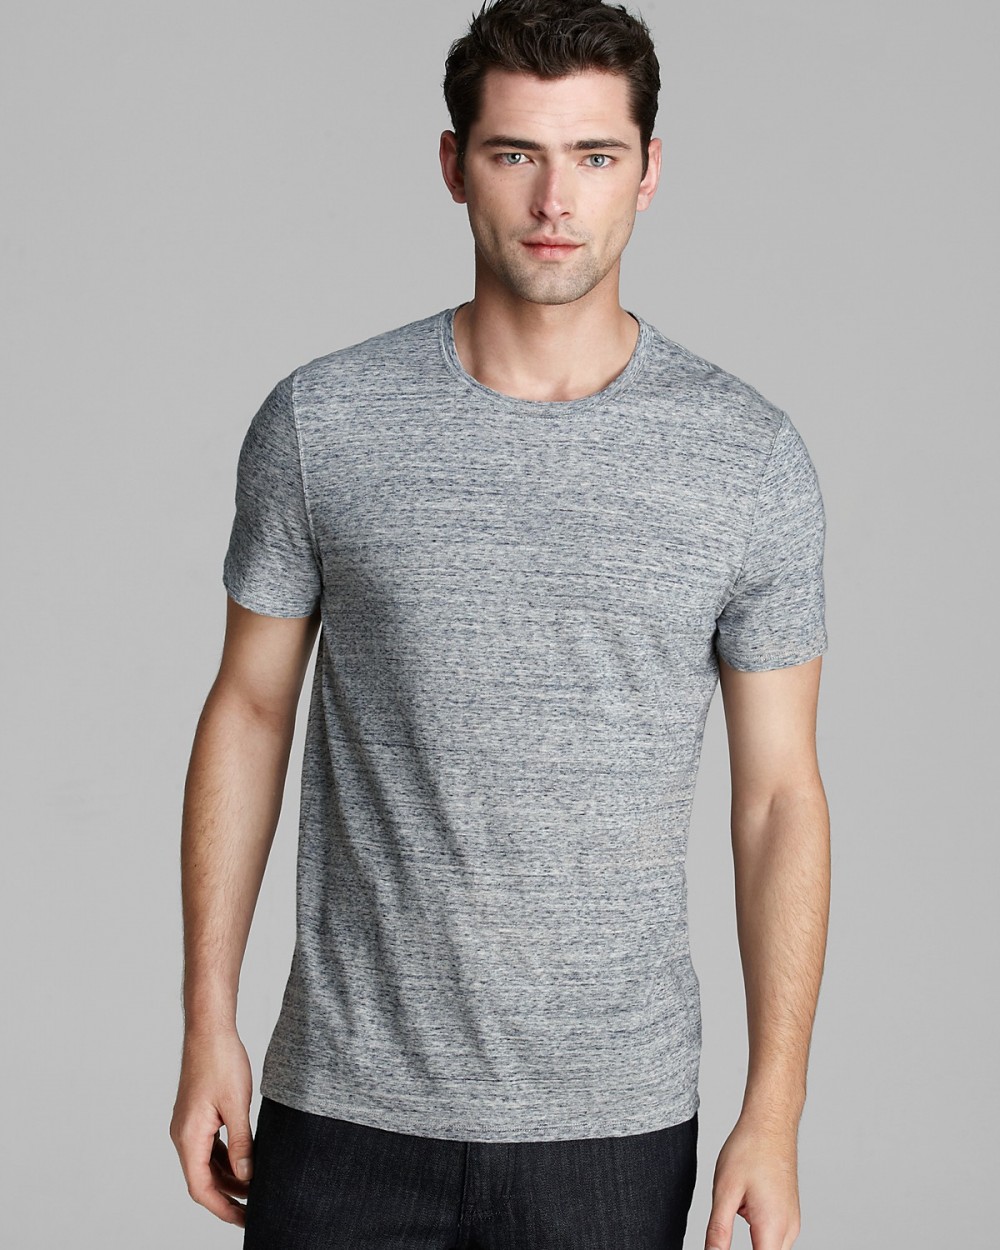 Sean O'Pry Sports Elie Tahari's Summer Collection for Bloomingdale's ...